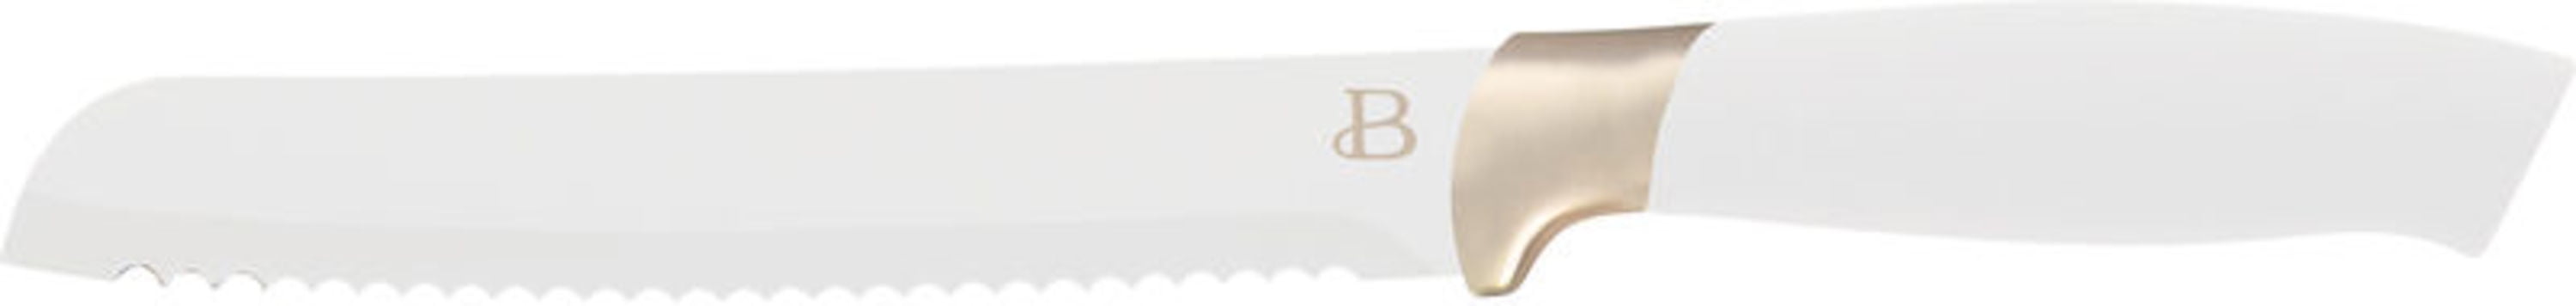 Beautiful 6 Piece Stainless Steel Knife Set in Black Champagne Gold By Drew  Barrymore 